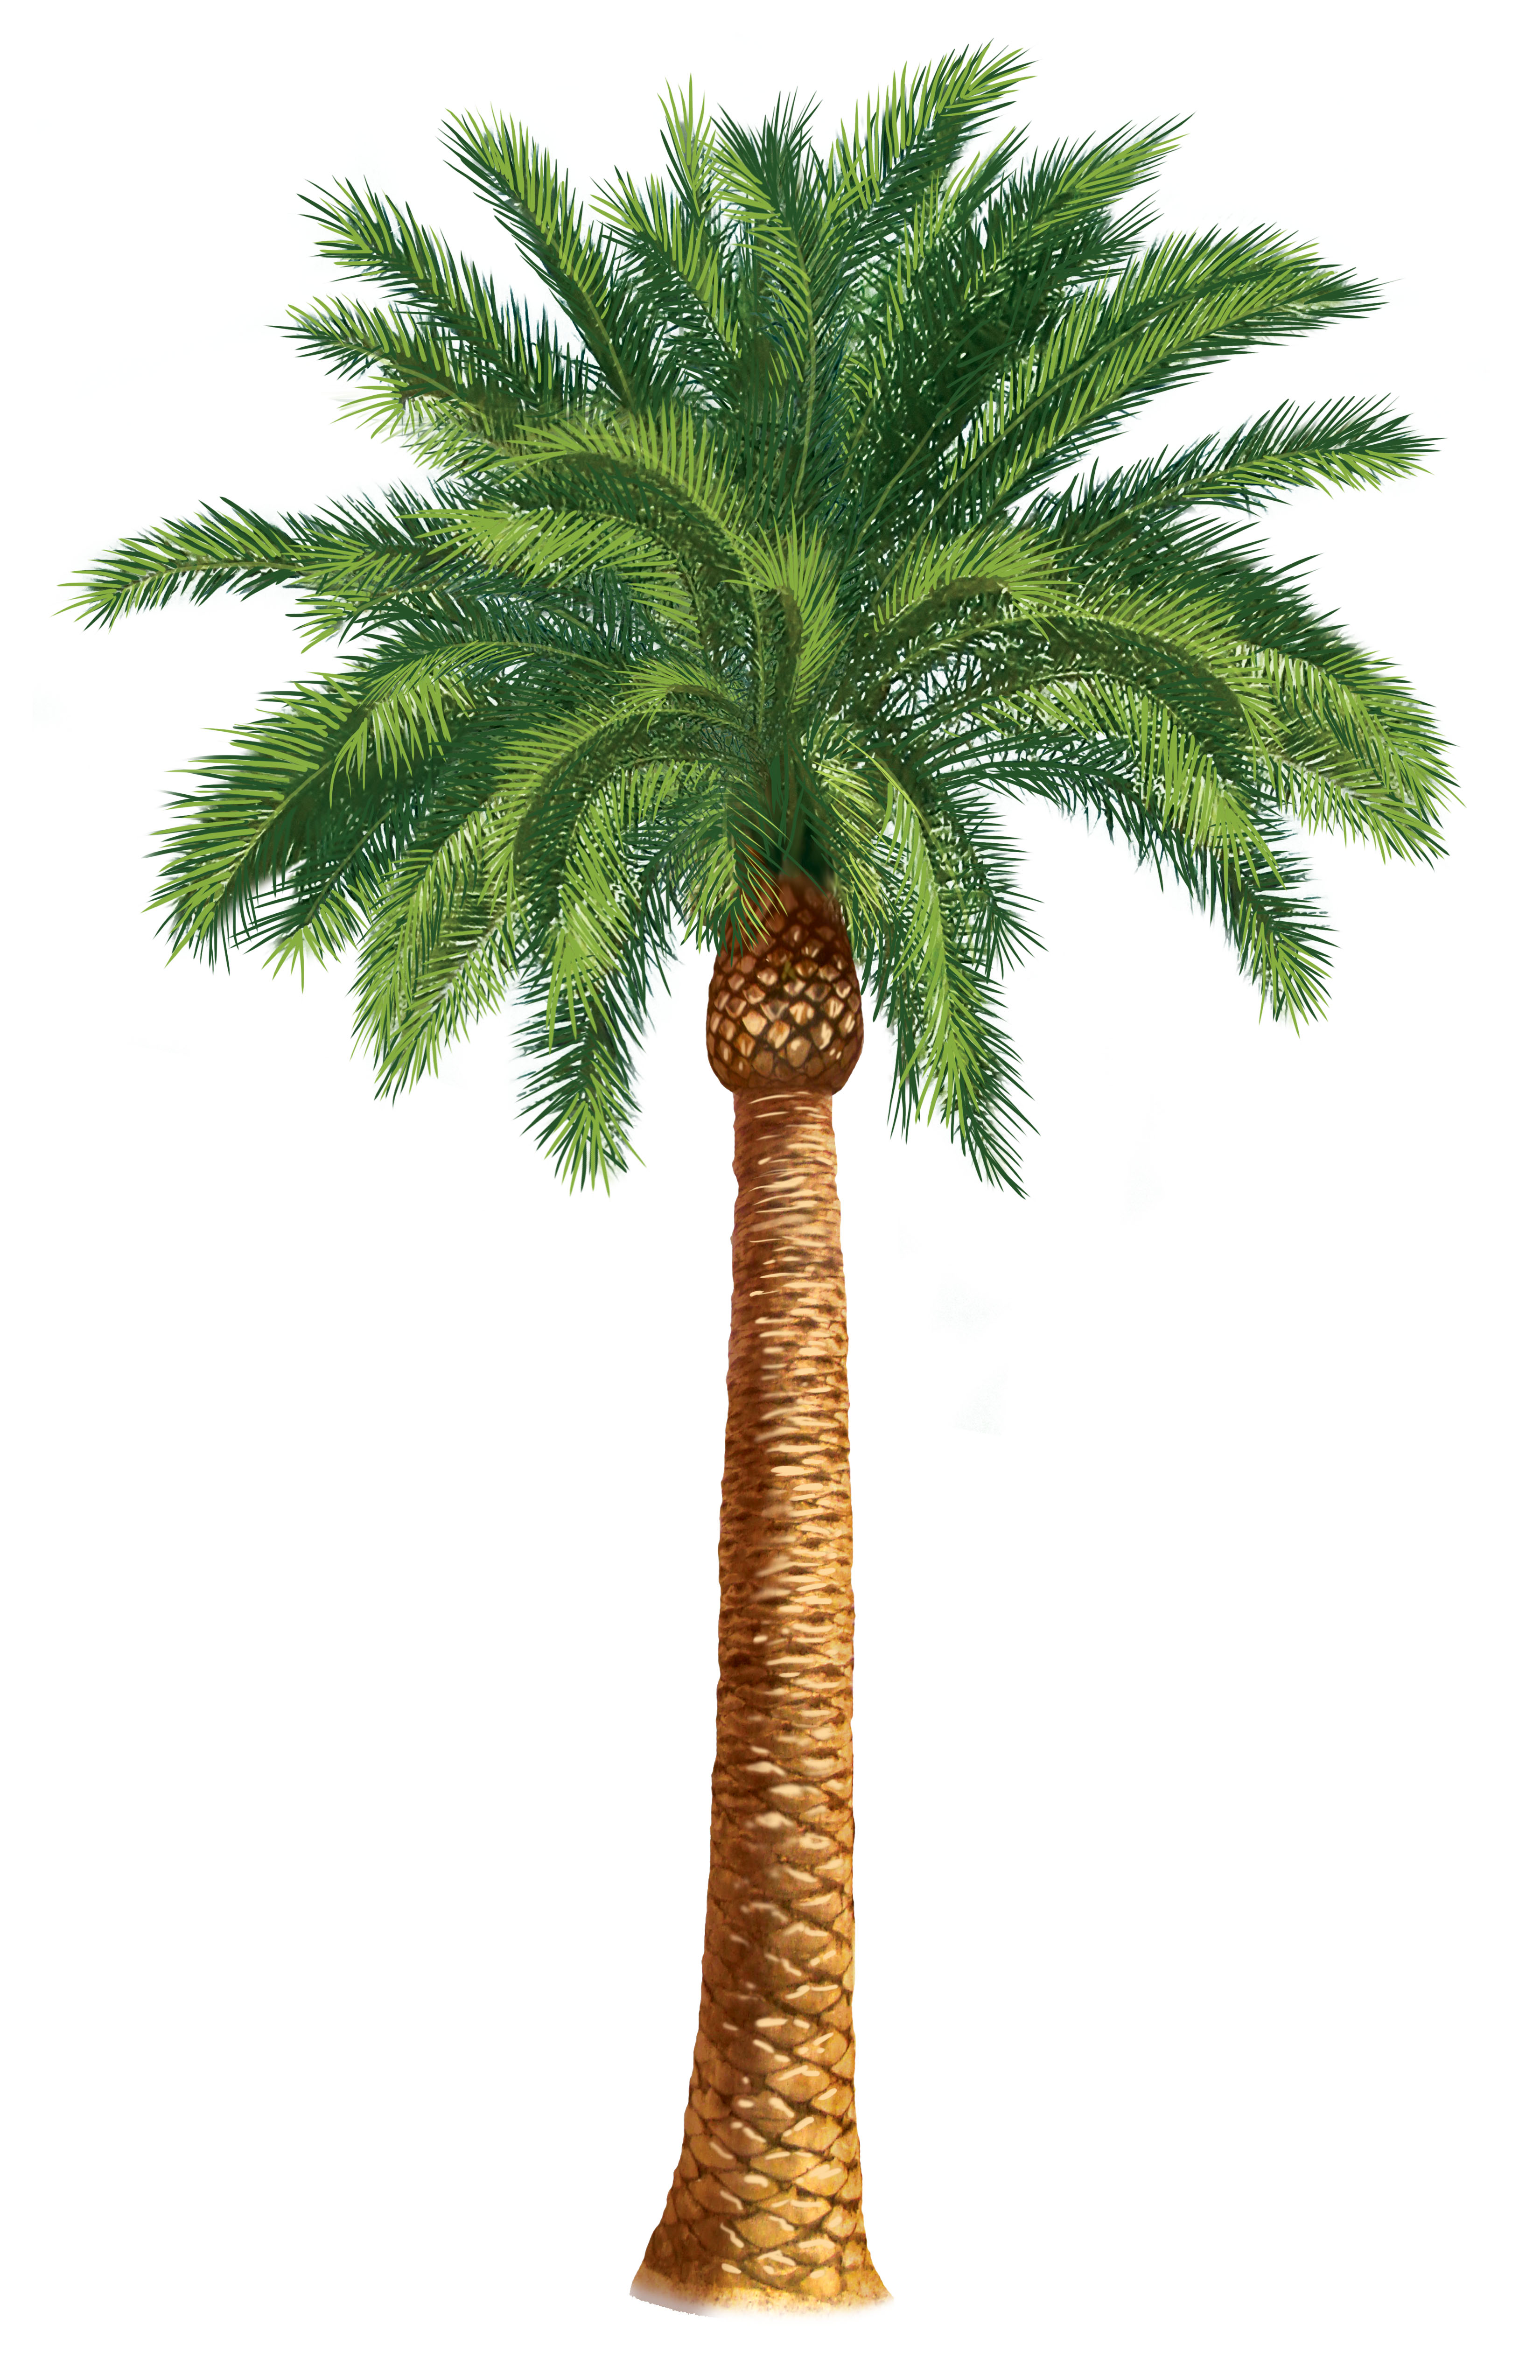 Amazing Palm Tree Pictures & Backgrounds